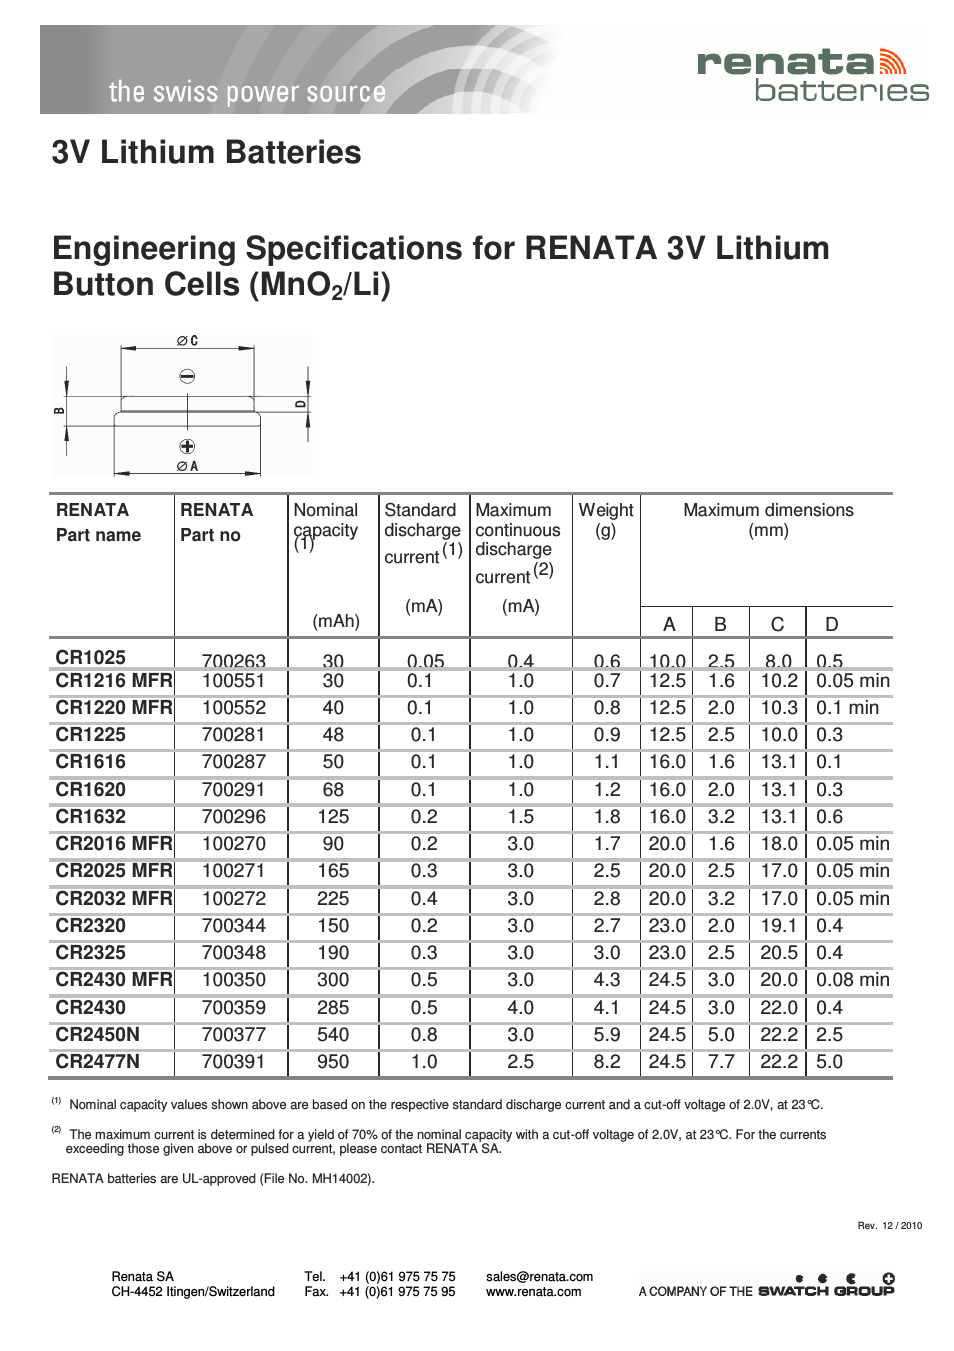 Encapsulated Batteries (Power Modules) - Engineering Specifications